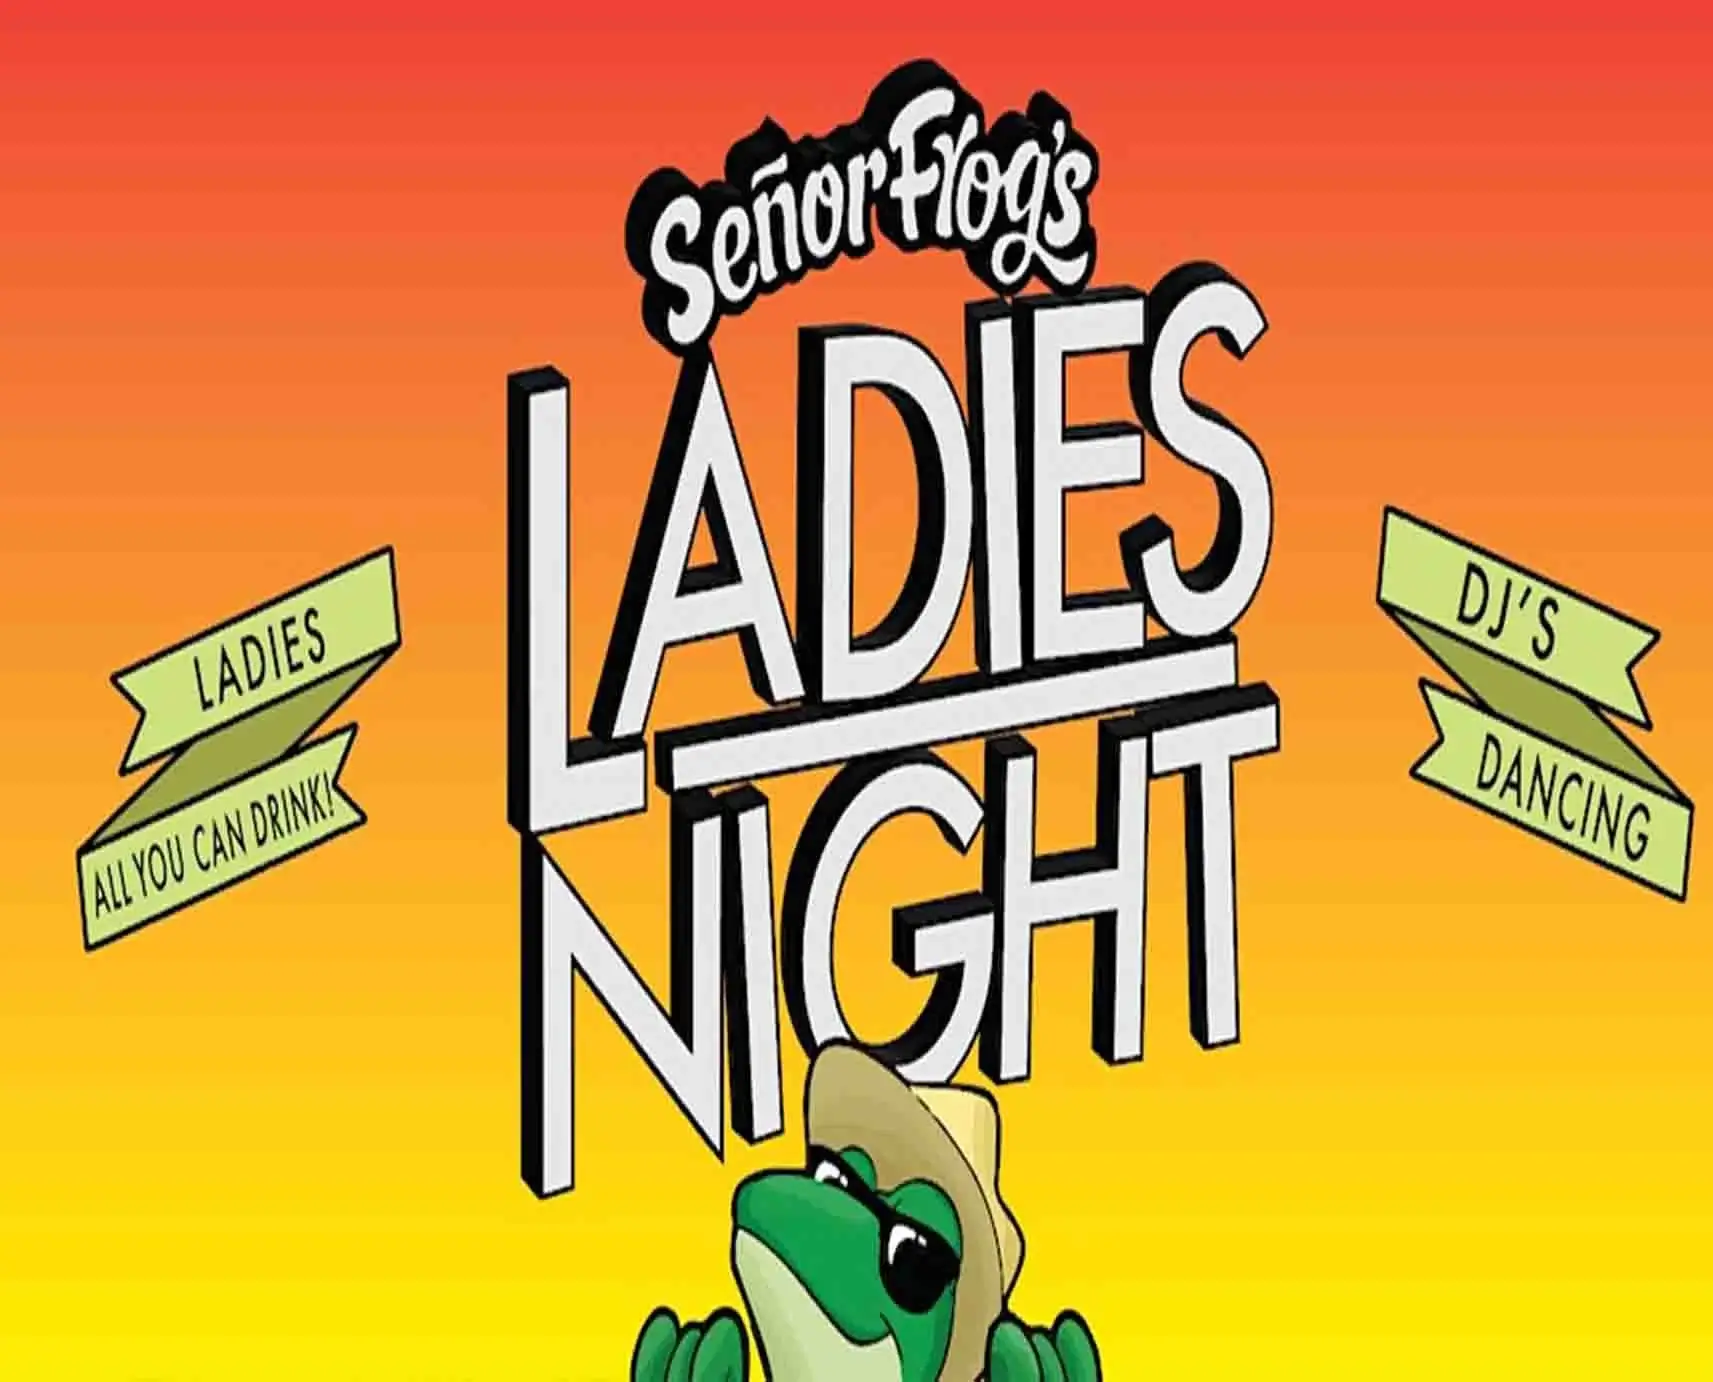 Wednesday Ladies Night OPEN BAR Party!